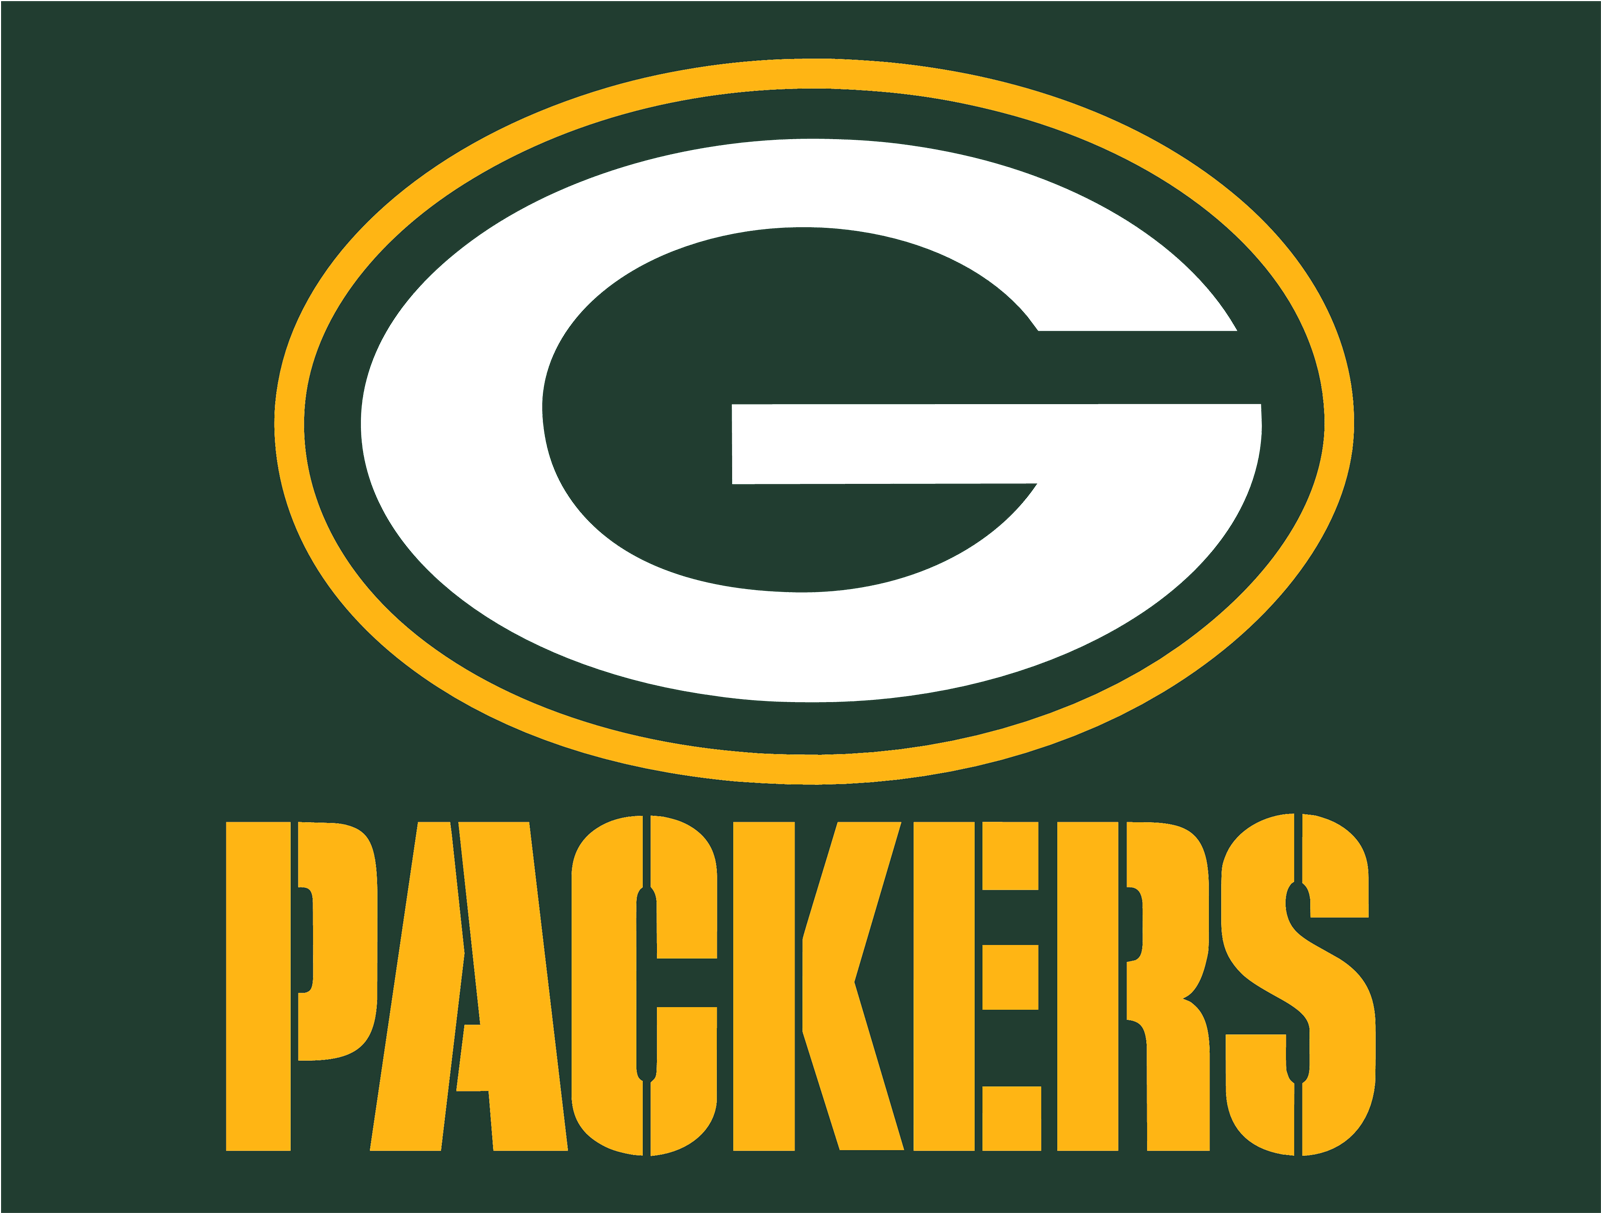 Do - Green Bay Packers Team 2017 (1700x1312) .